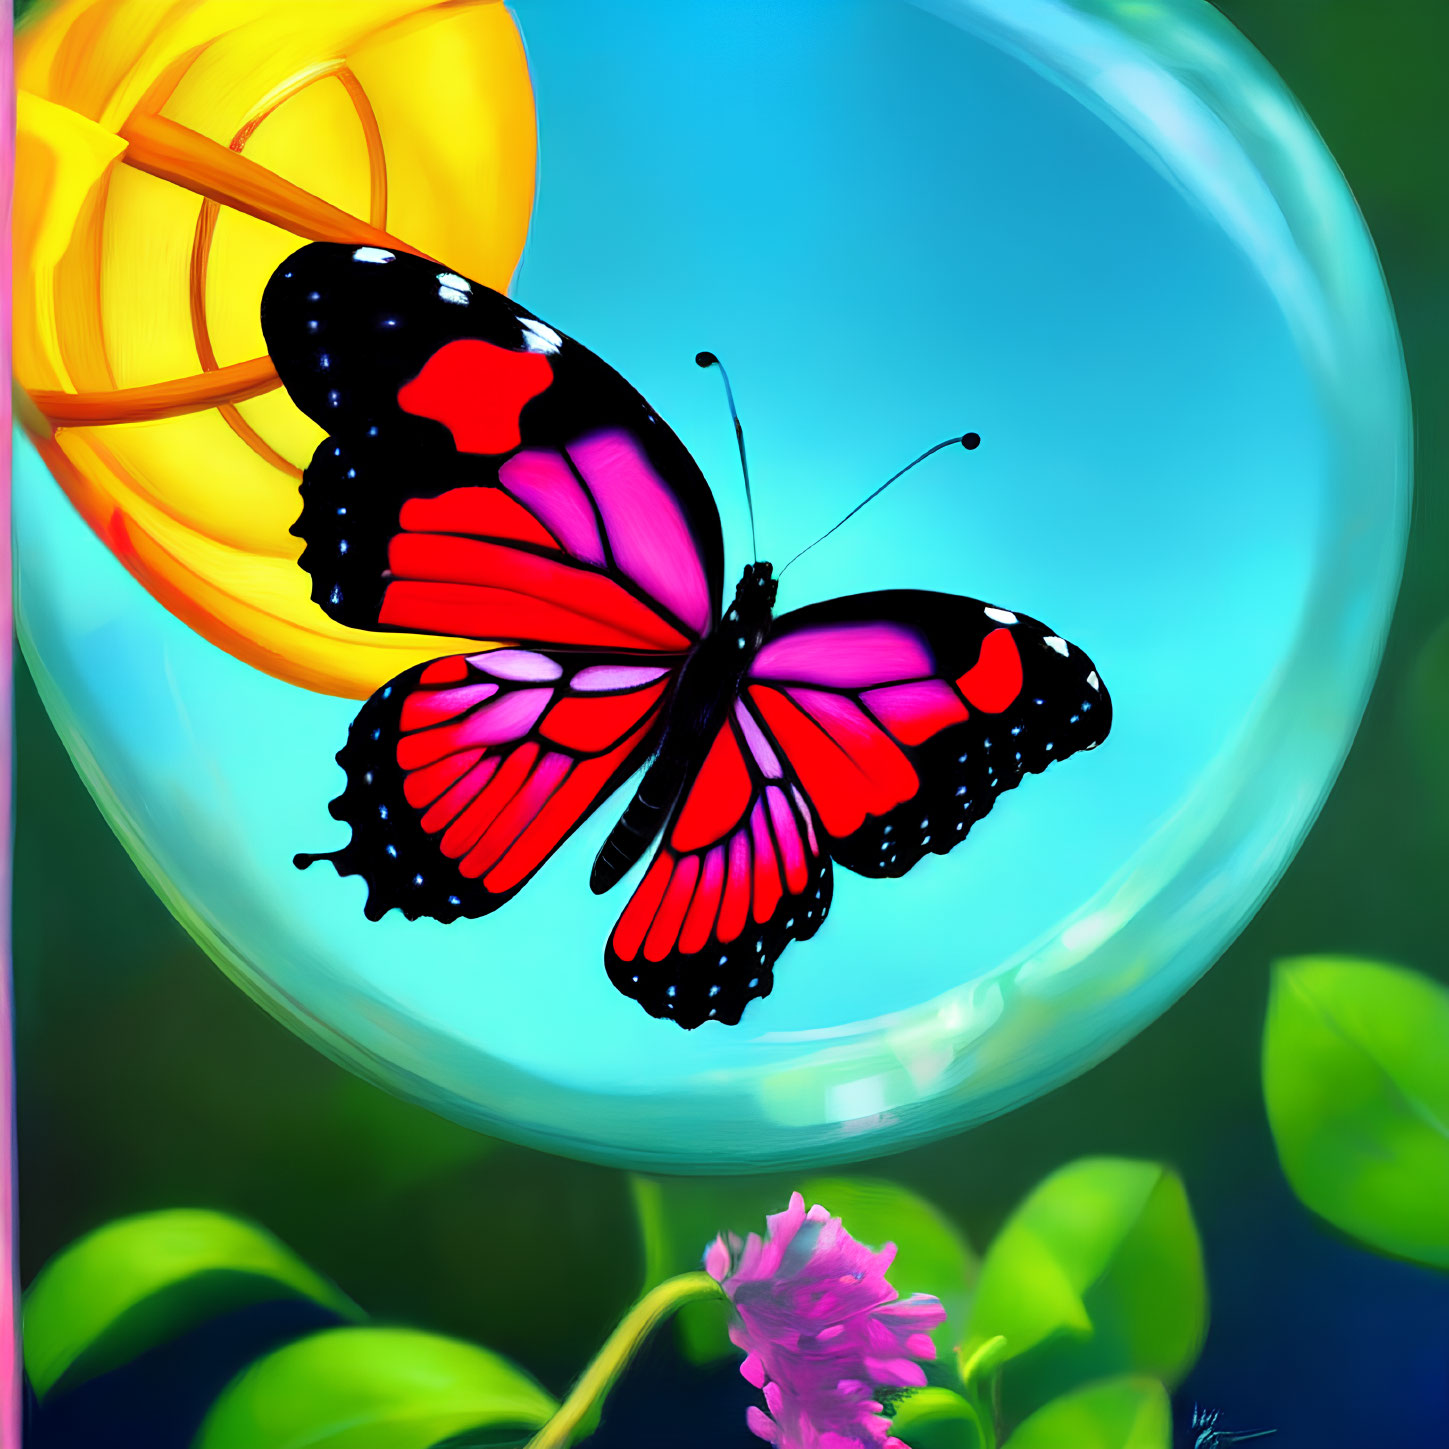 Colorful Butterfly Artwork with Bubble, Flower, and Greenery